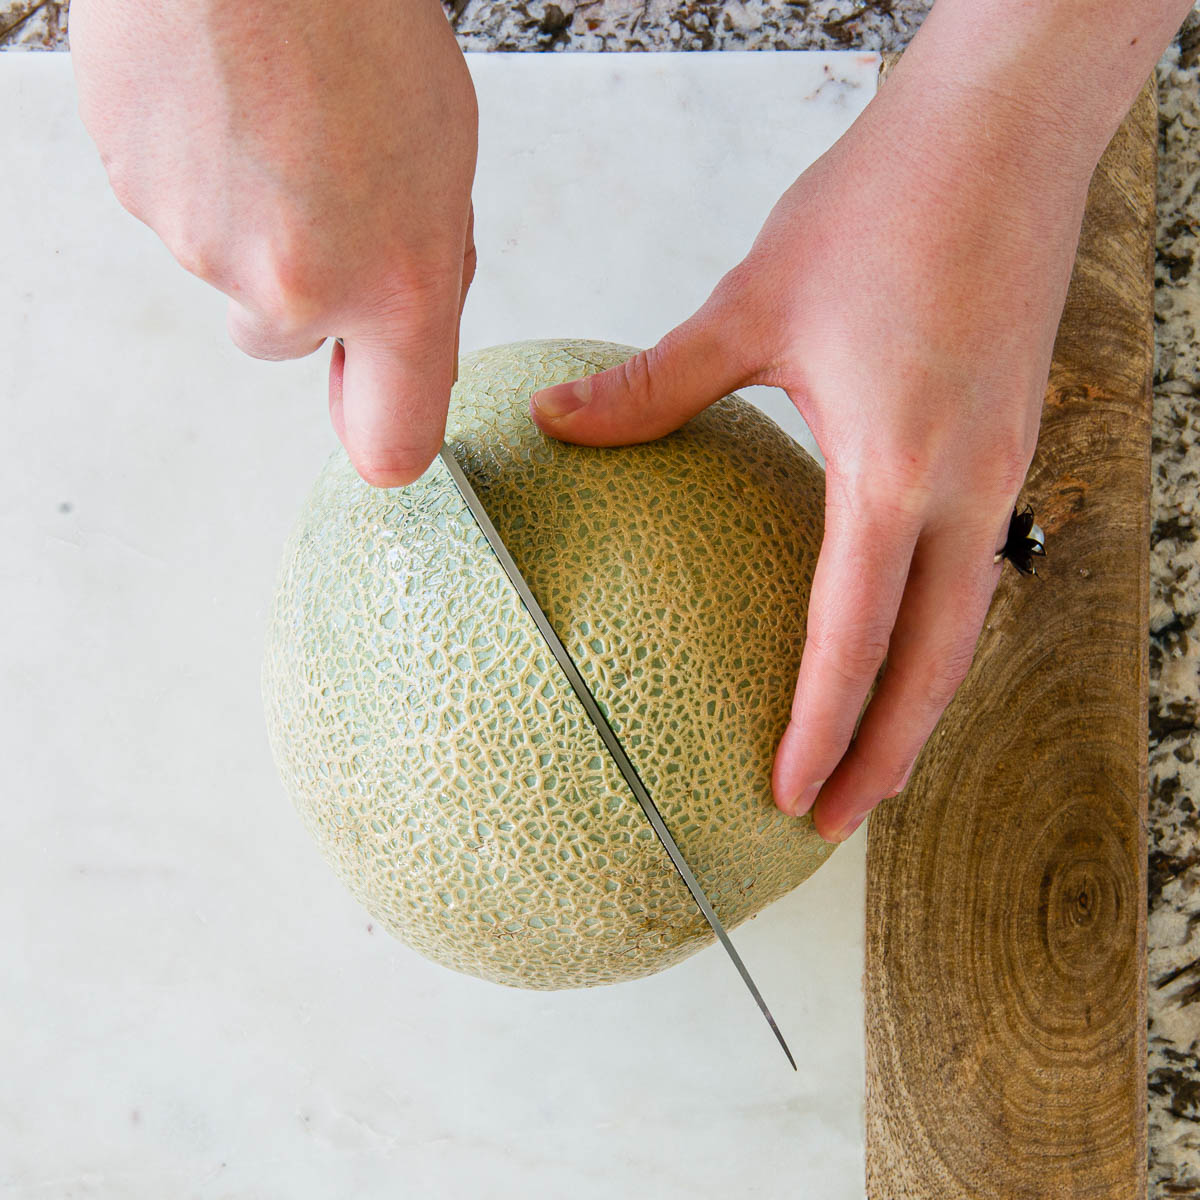 slicing a whole cantaloupe in half with a chef's knife.